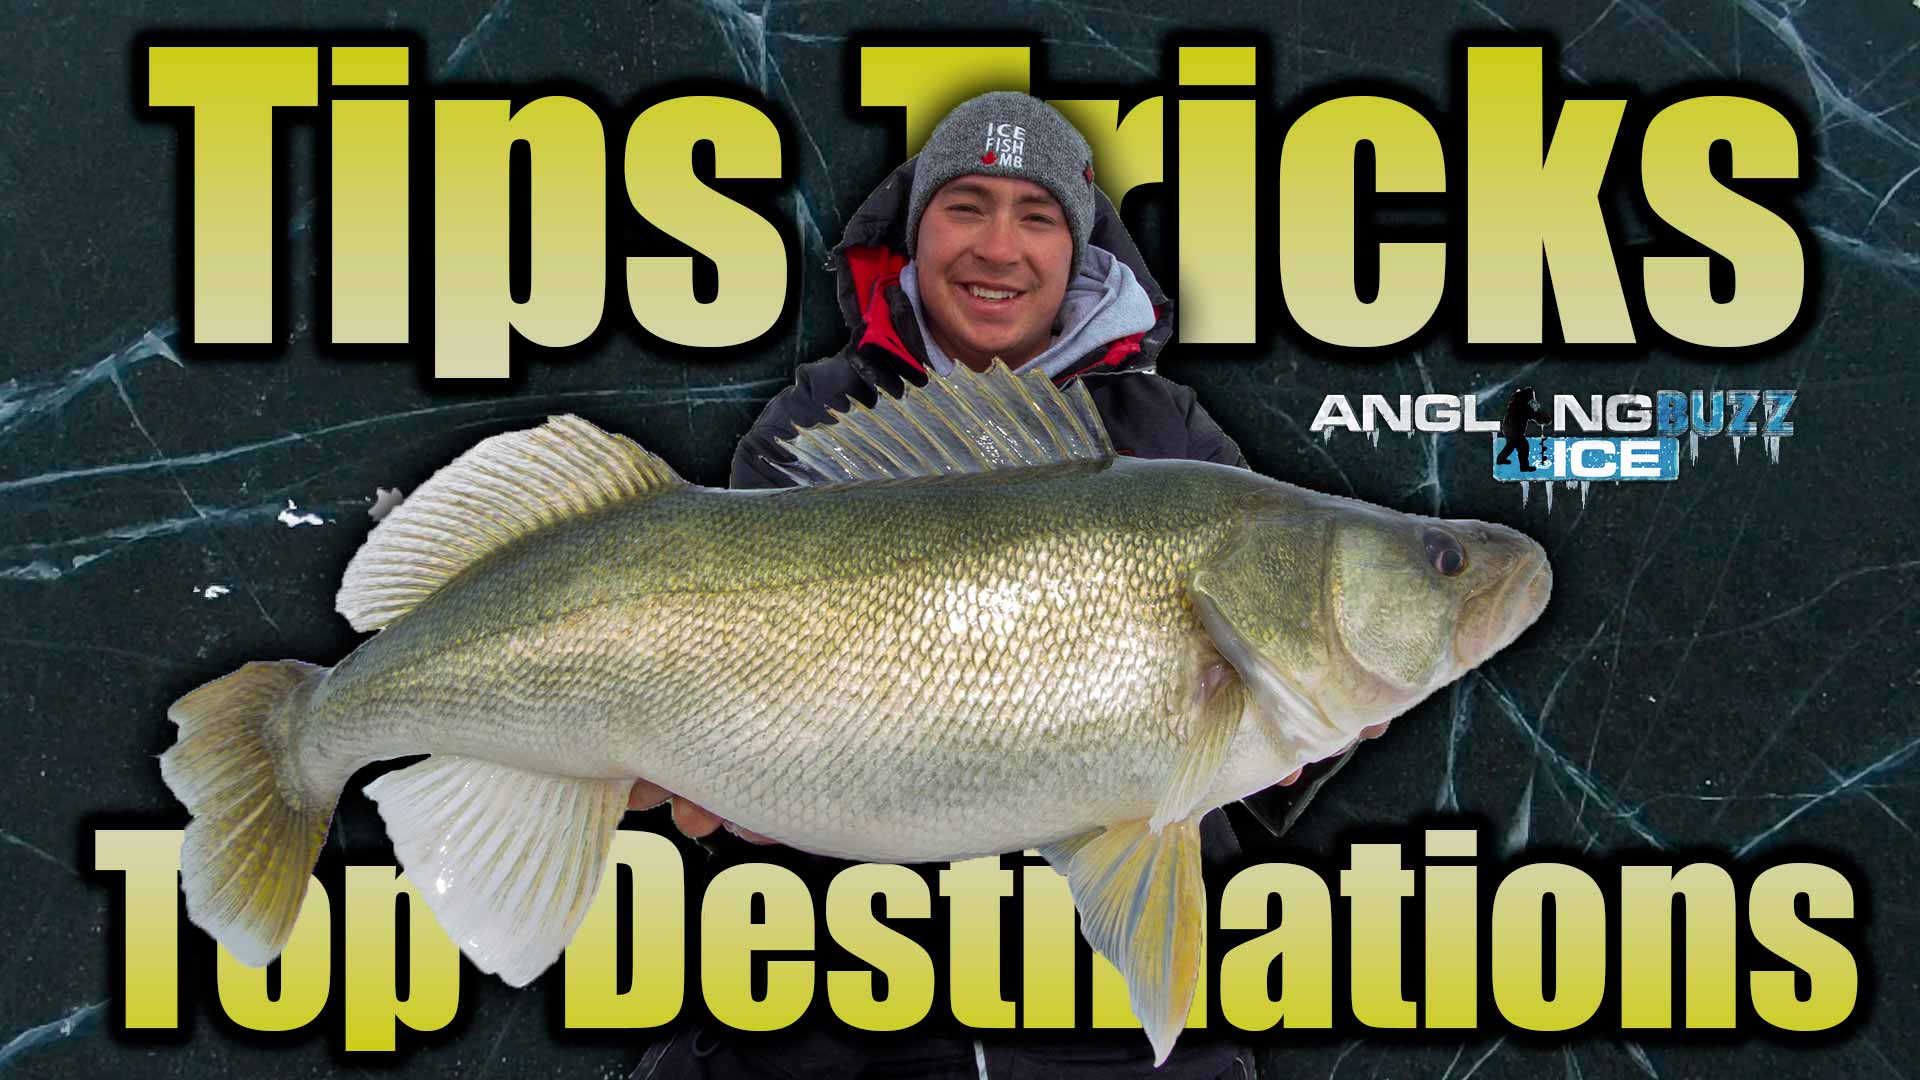 AnglingBuzz Ice Show 4: Ice Fishing Walleyes: Tips, Tricks, Top